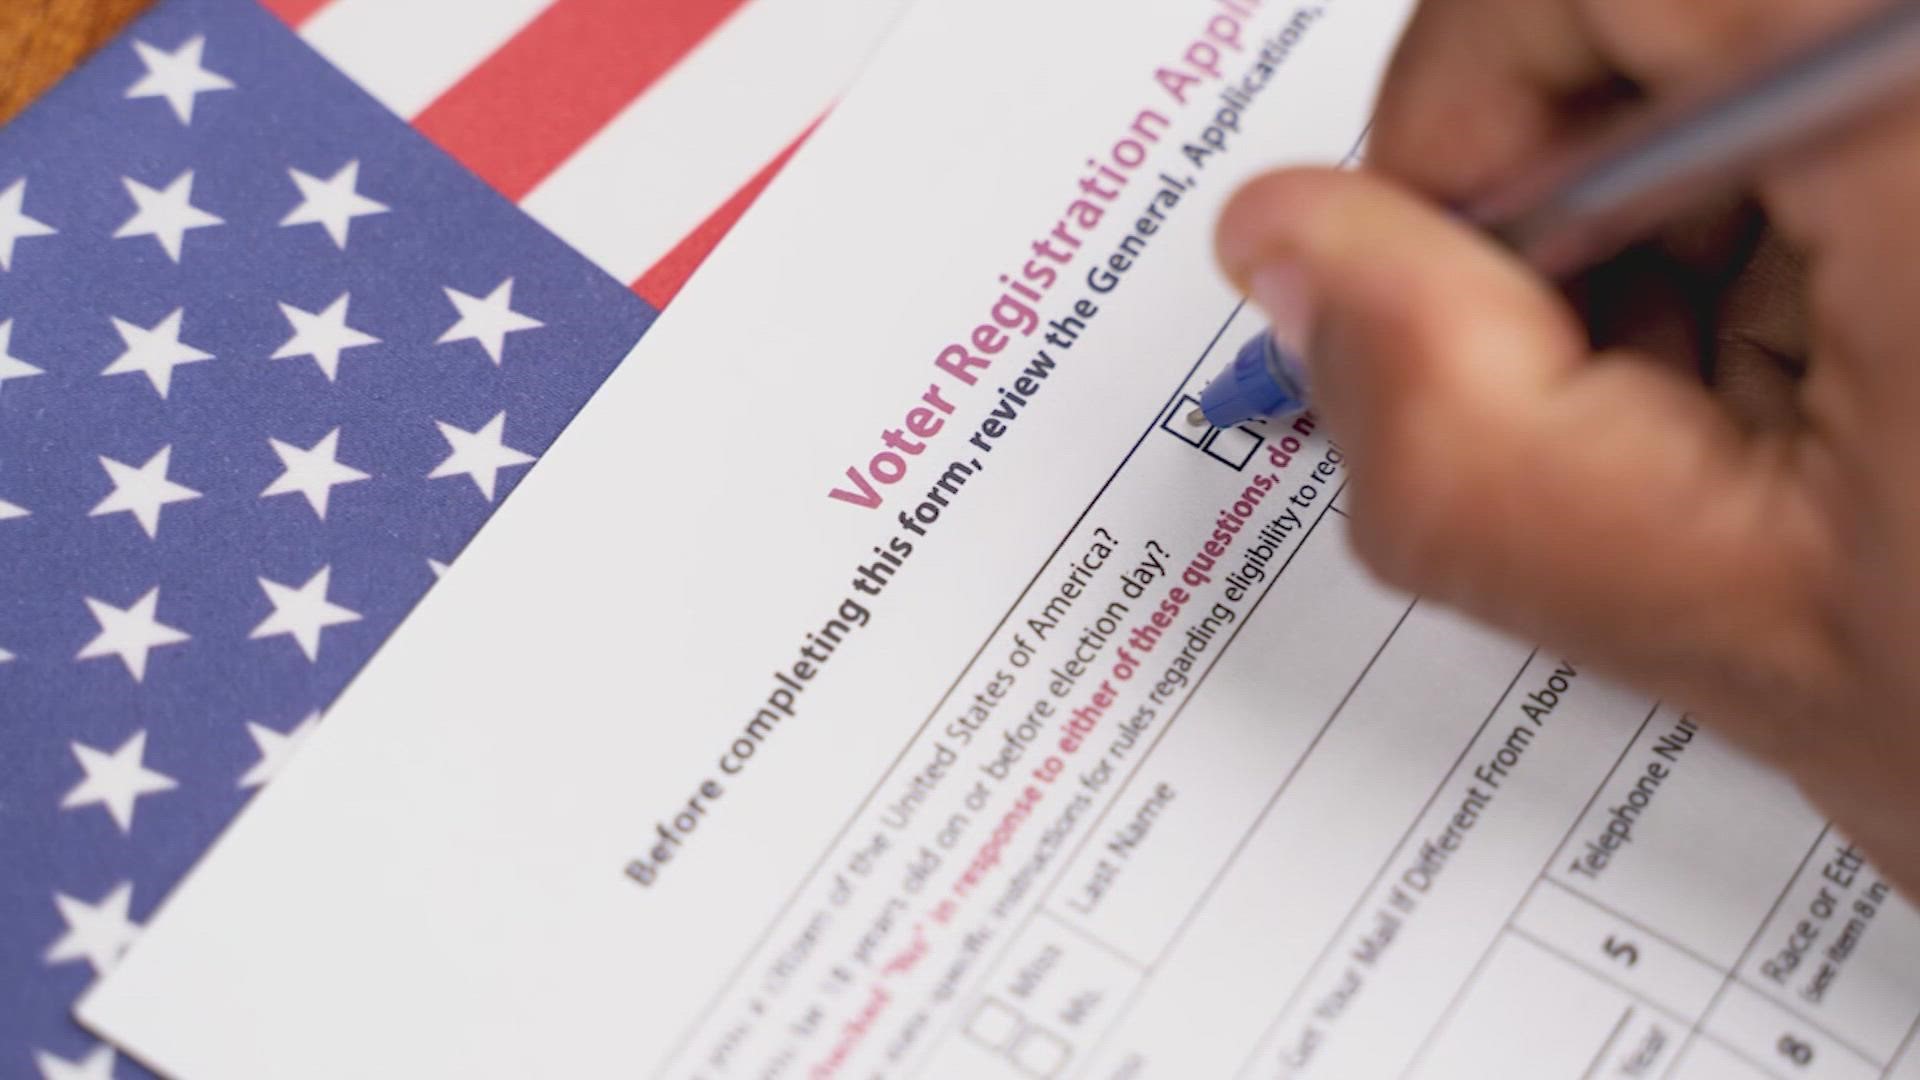 In Harris County, the process starts by filling out a voter registration form that you can get at any Harris County Public Library or Harris County Elections office.